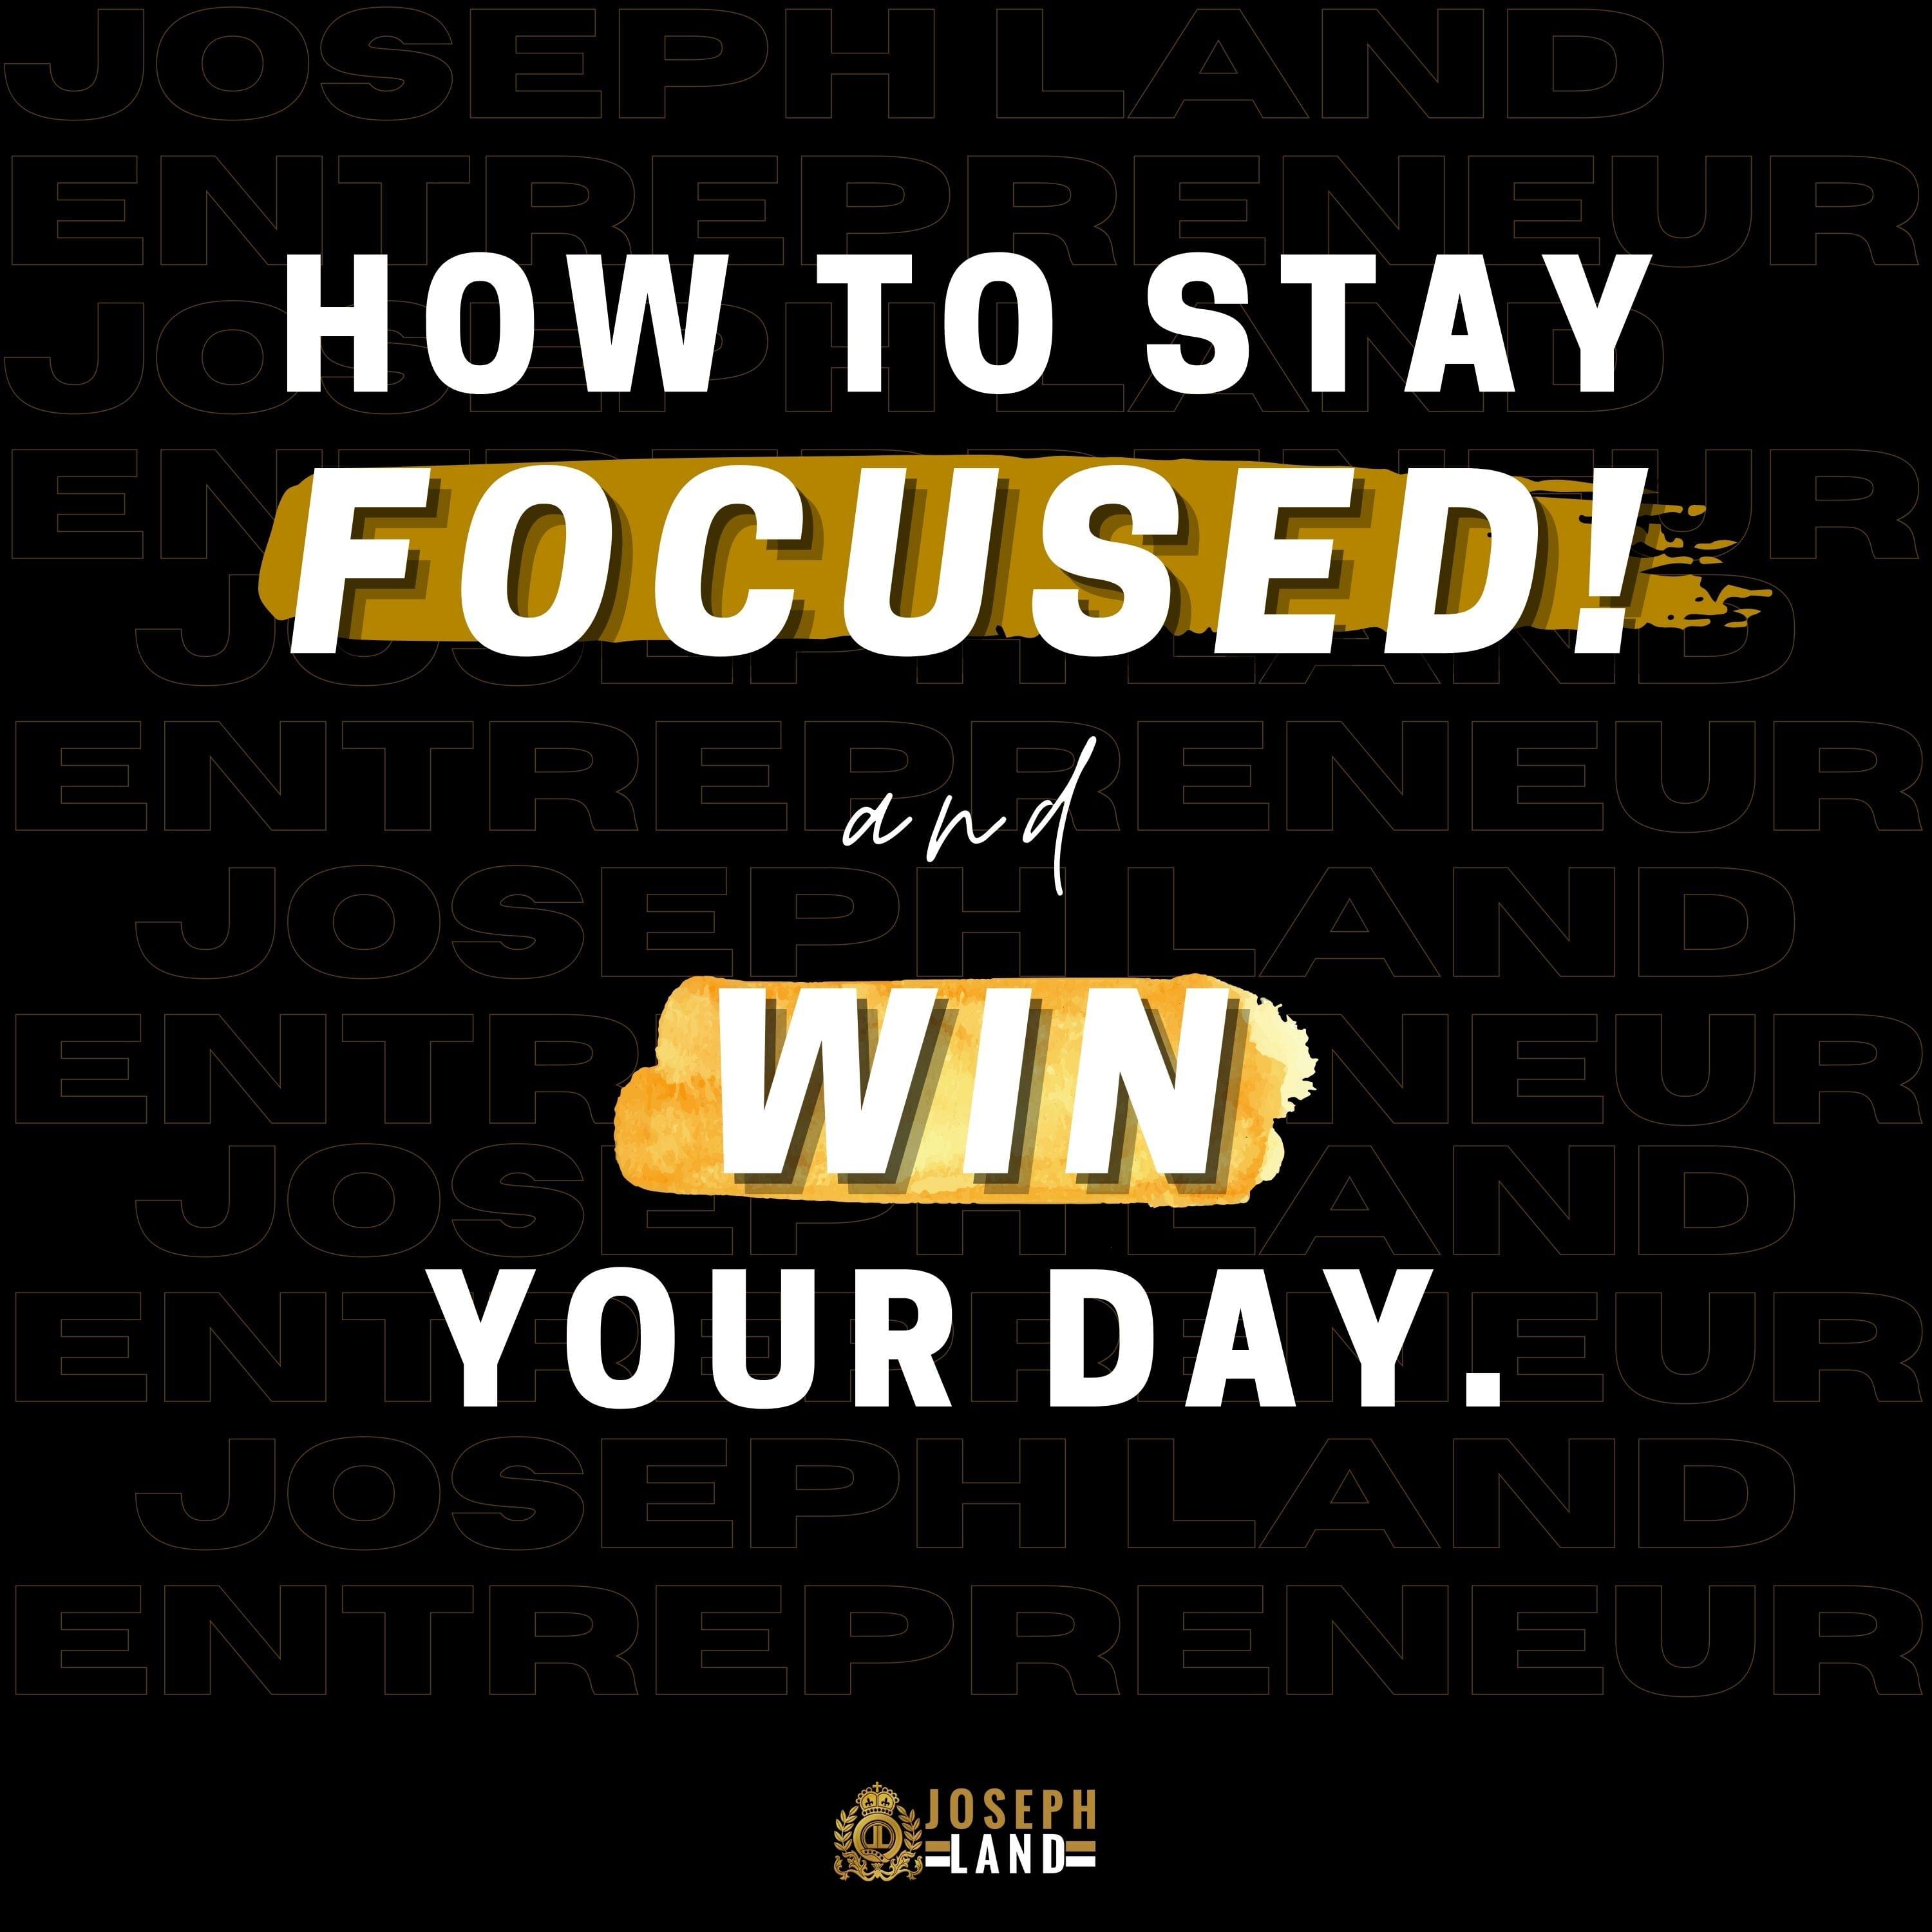 How To Stay Focused and Win Your Day